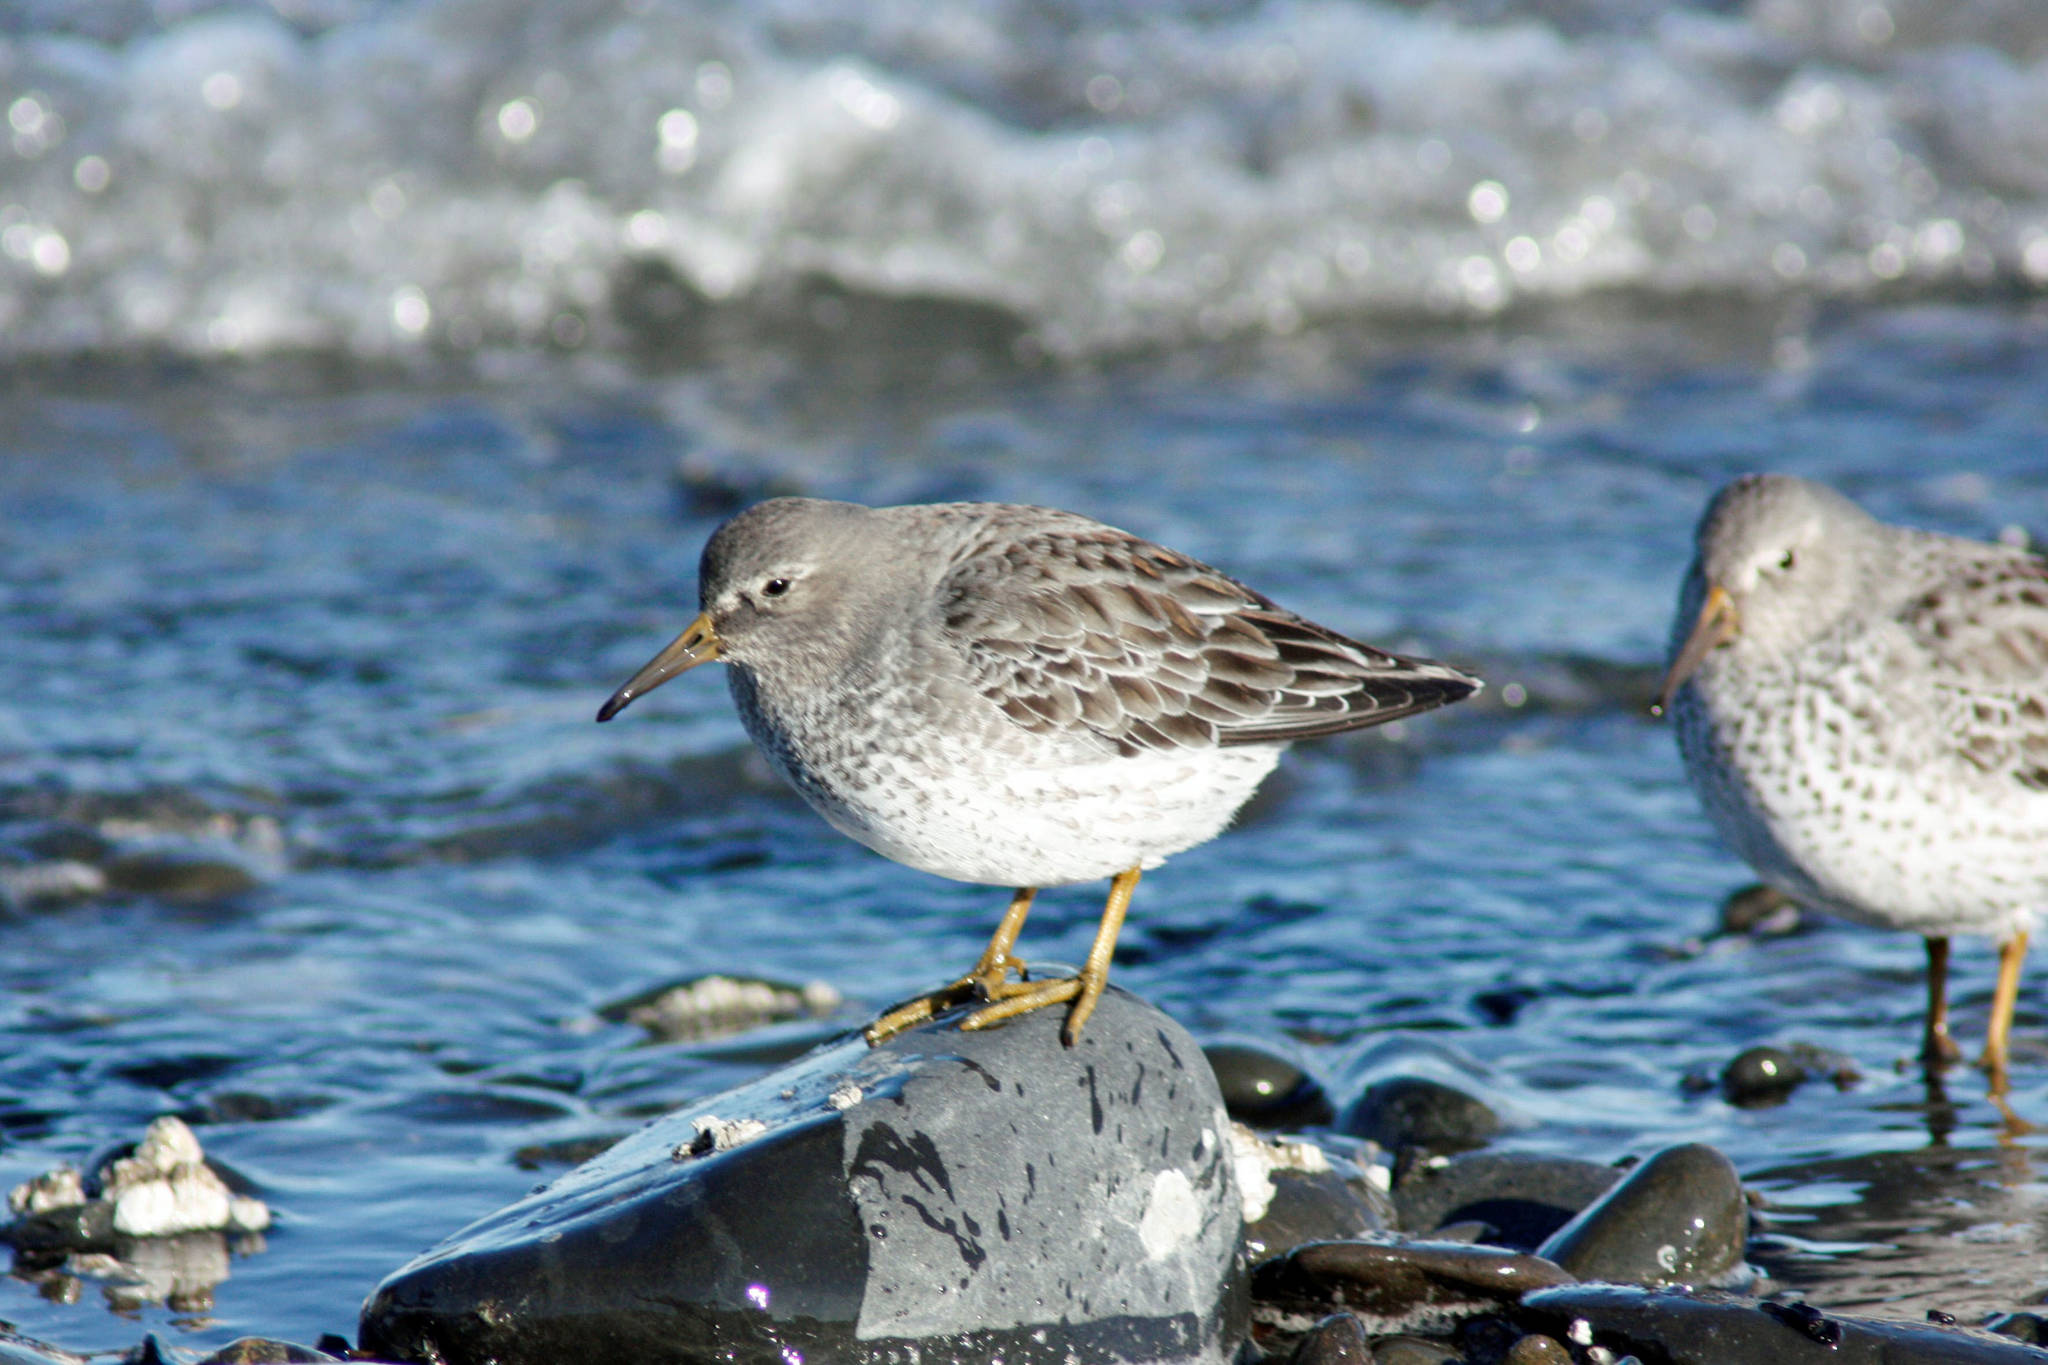 A rock sandpiper forages among ice on the Homer Spit in February 2012 in Homer, Alaska (Photo by George Matz)